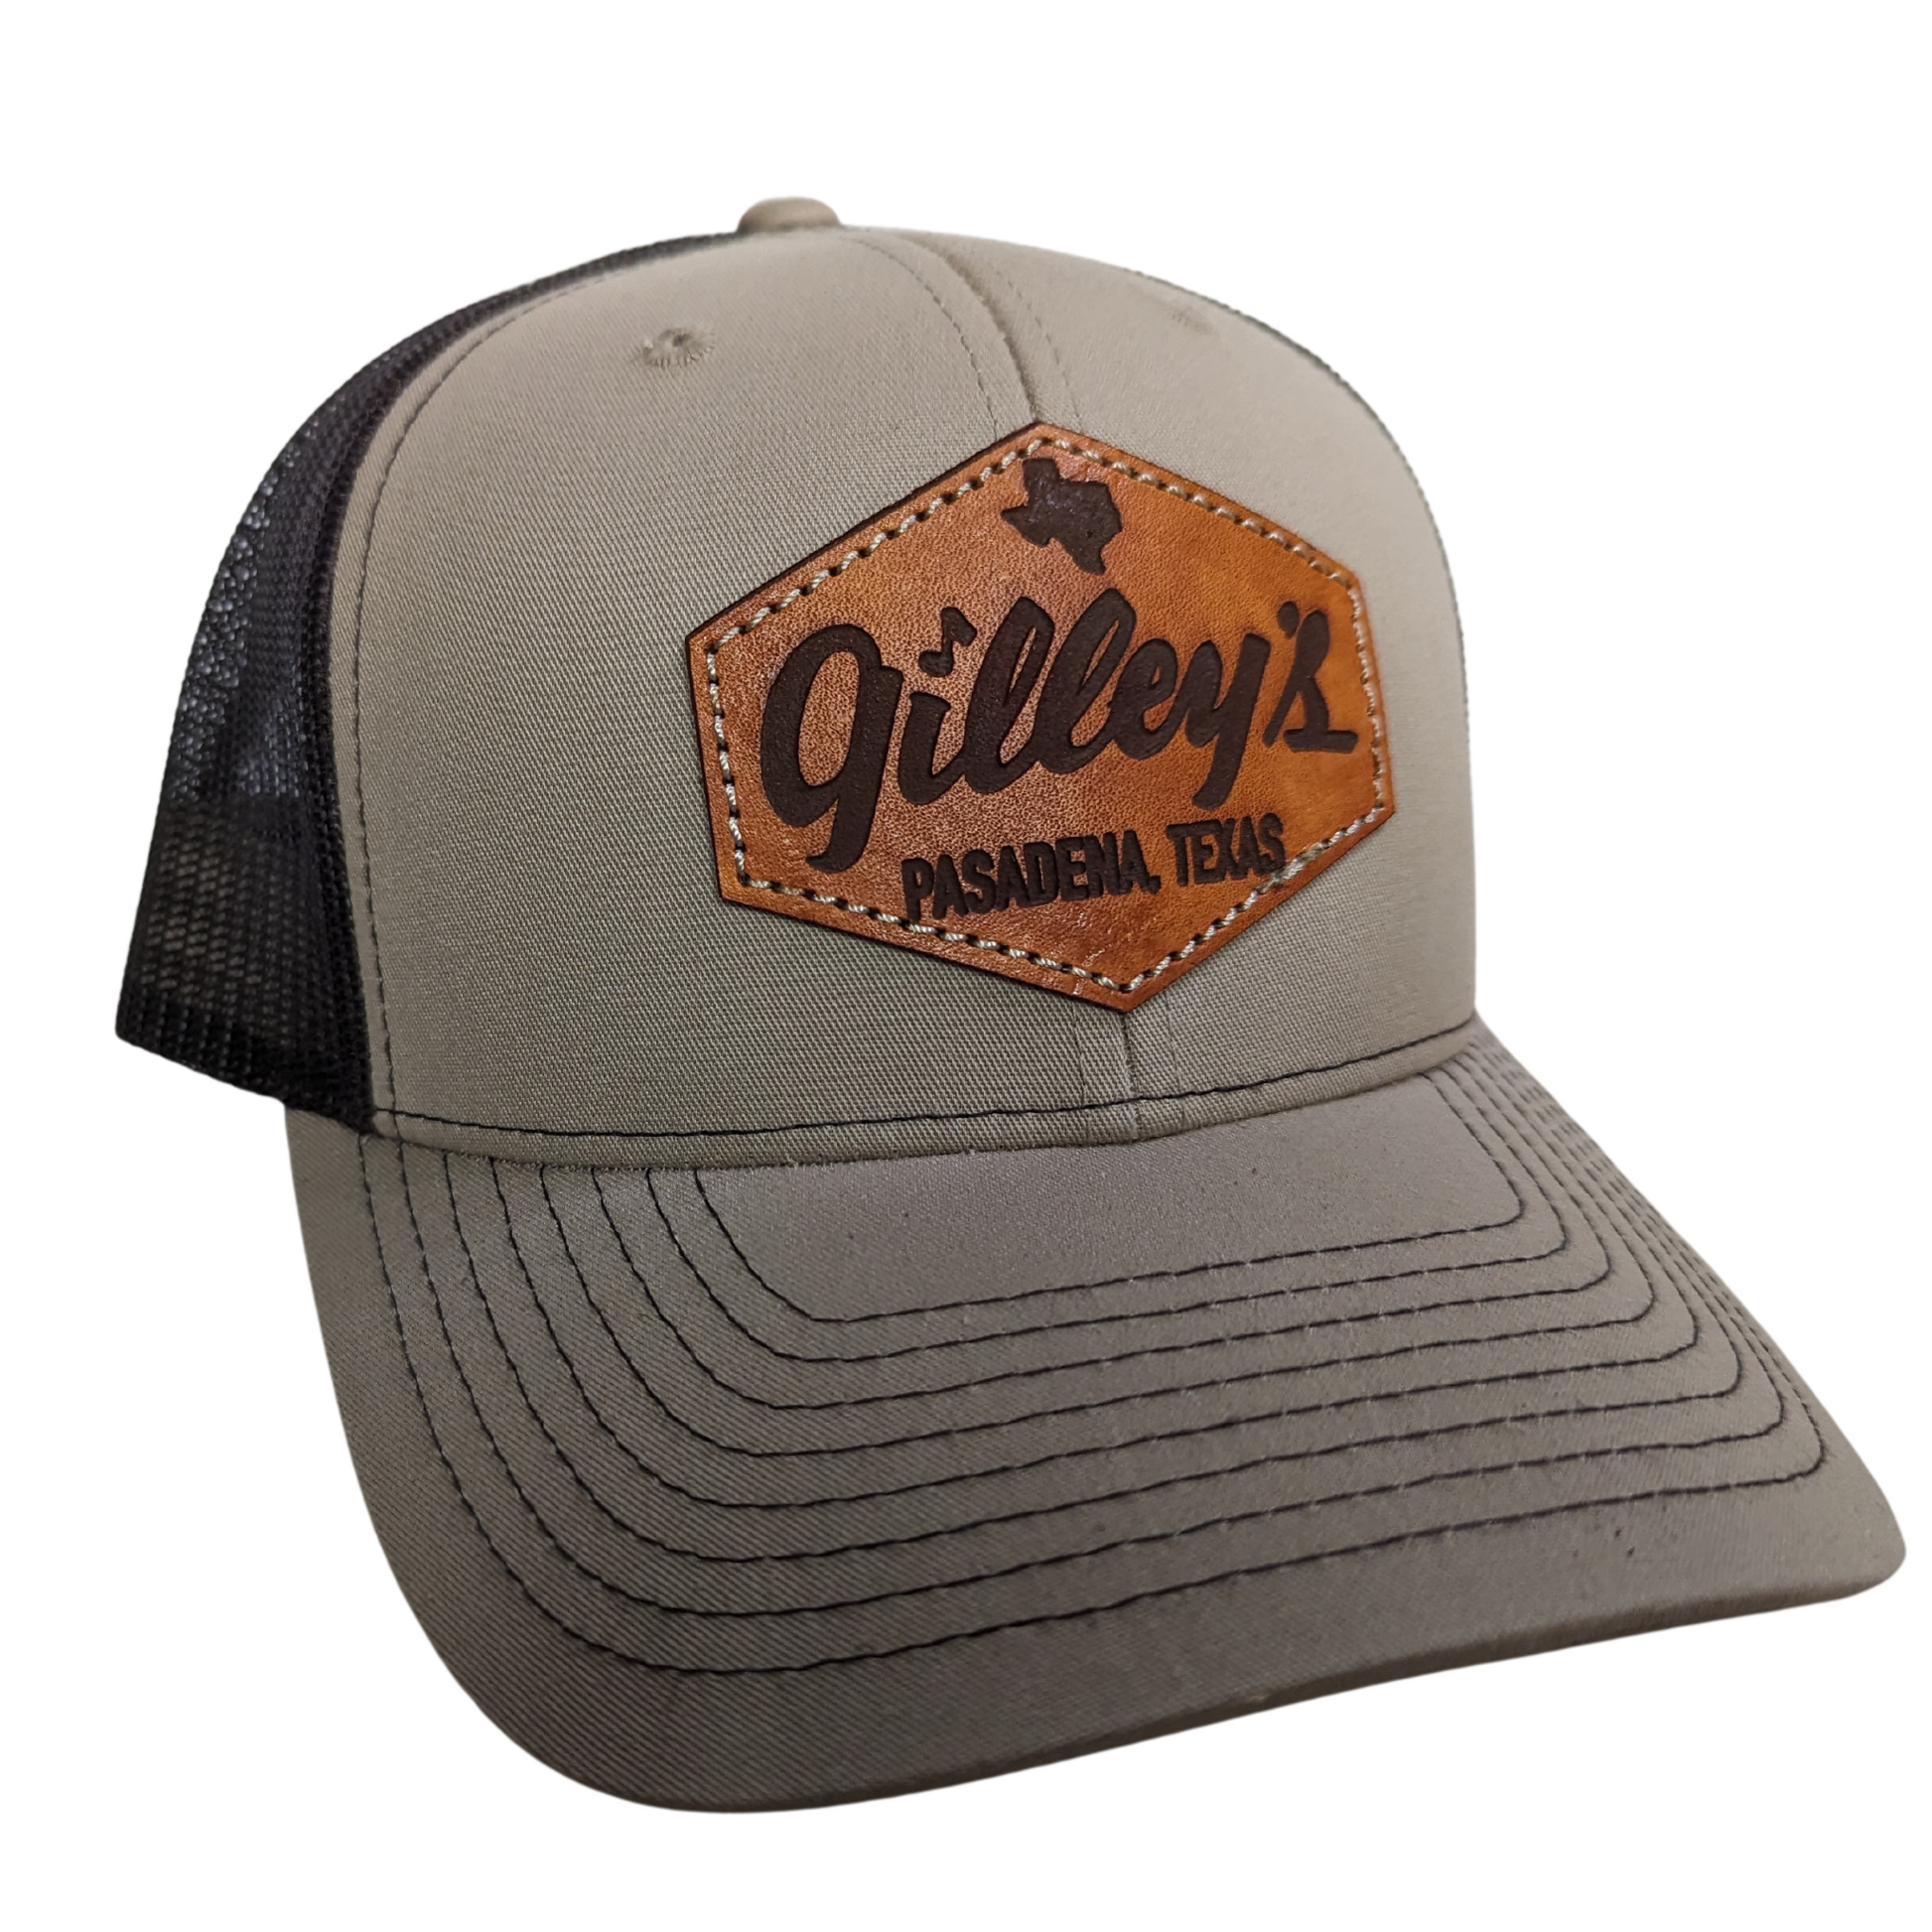 Gilley's Trucker Cap Leather Patch Khaki/Brown